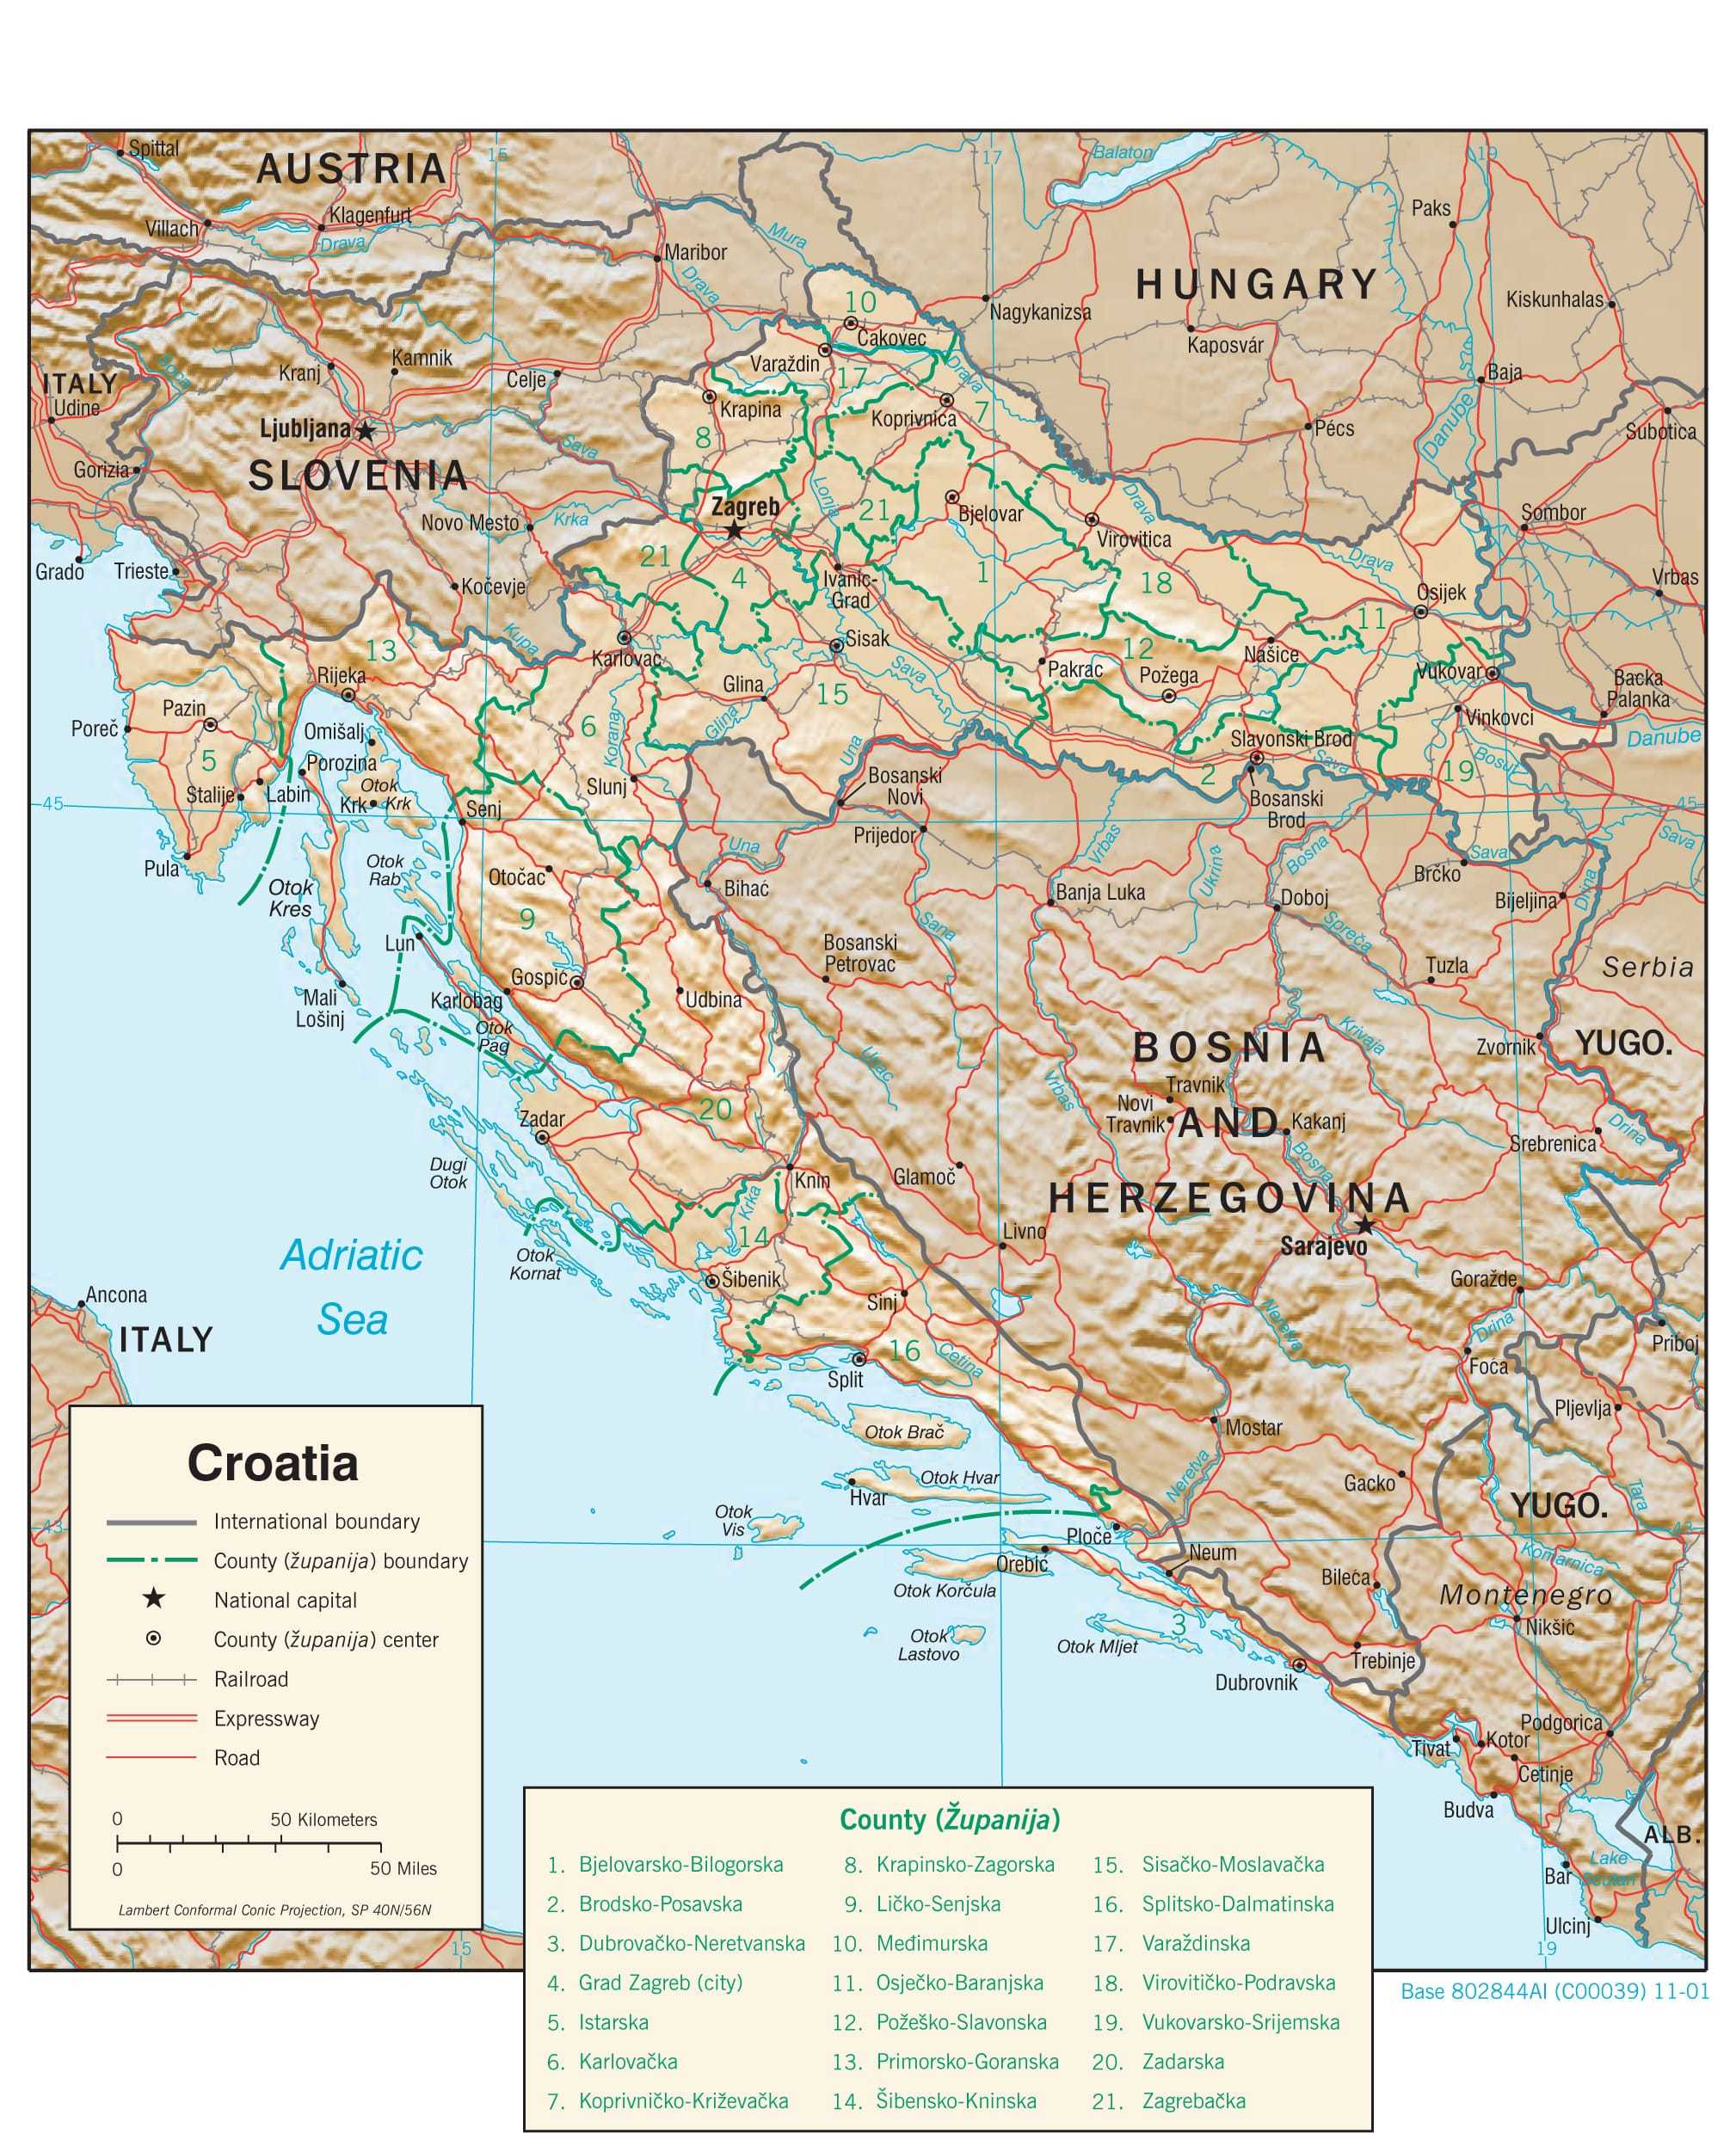 Physiographical map of Croatia.